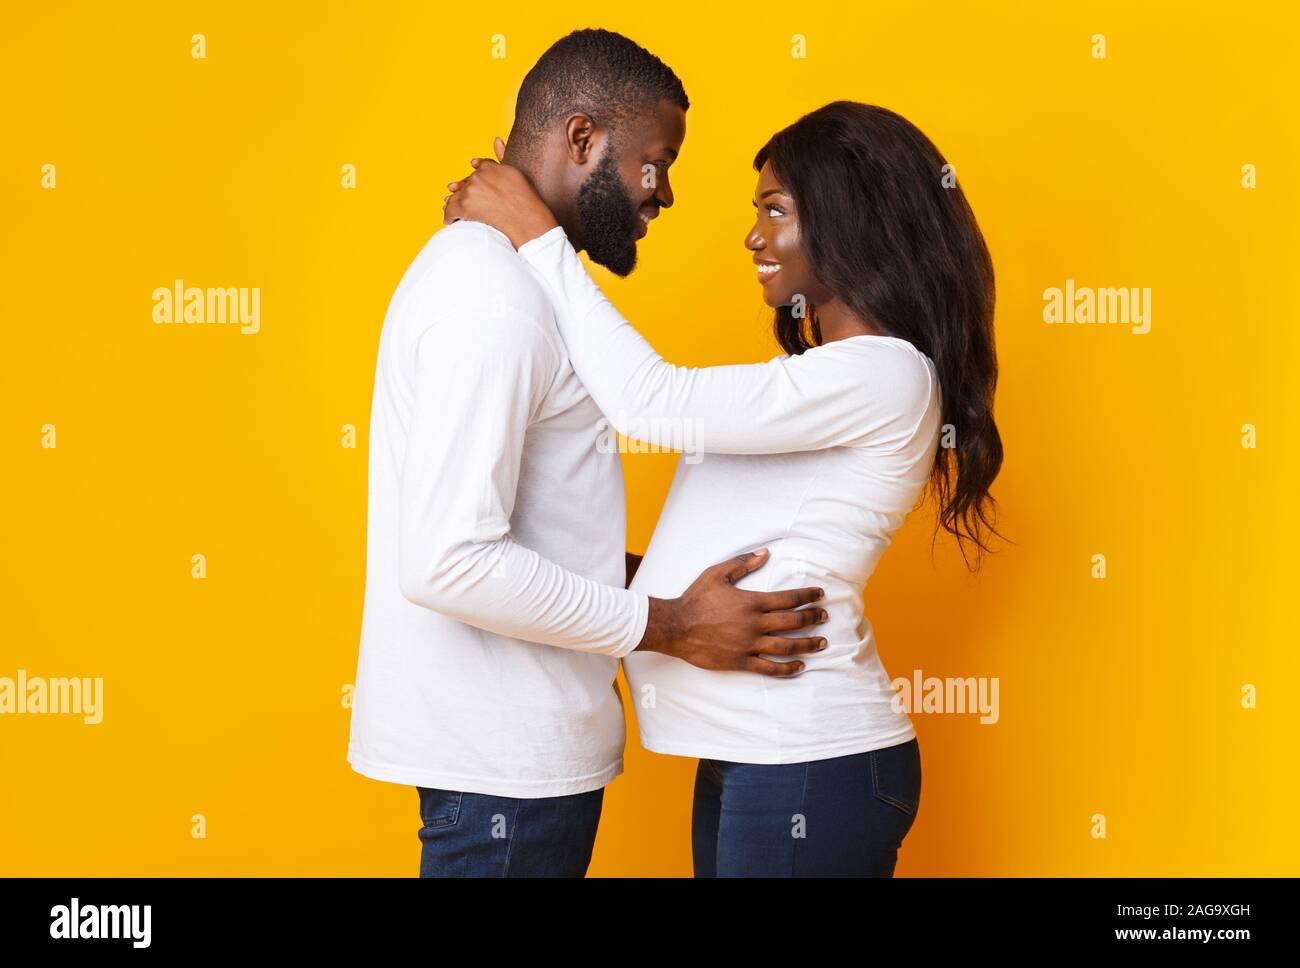 Pregnant black woman and her husband embracing over yellow background Stock Photo